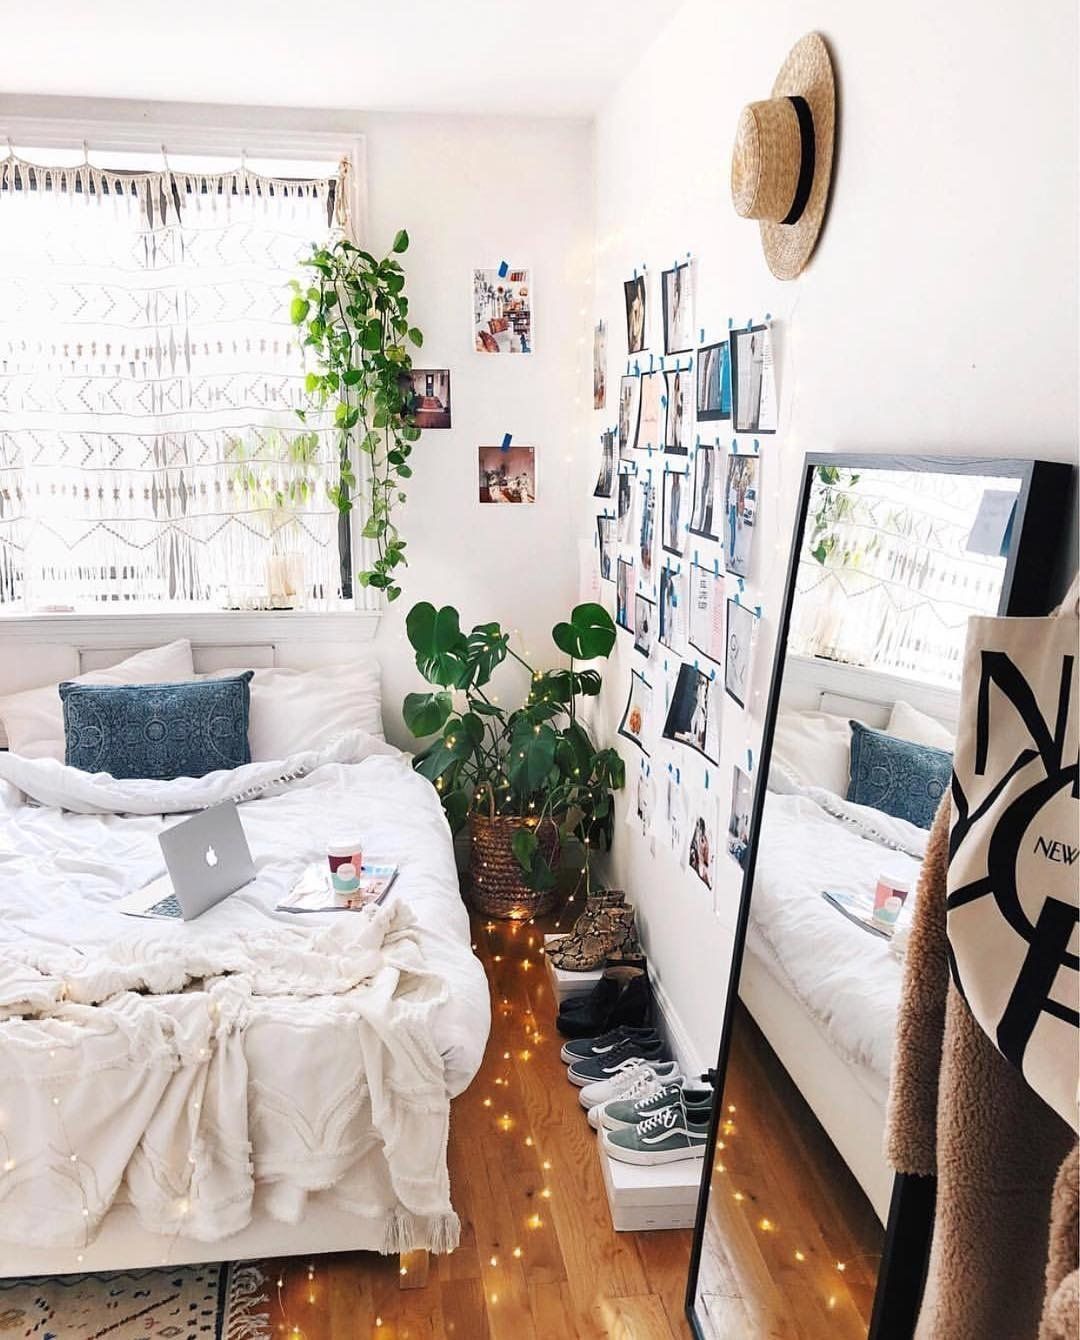 Urban Outfitters Bedroom